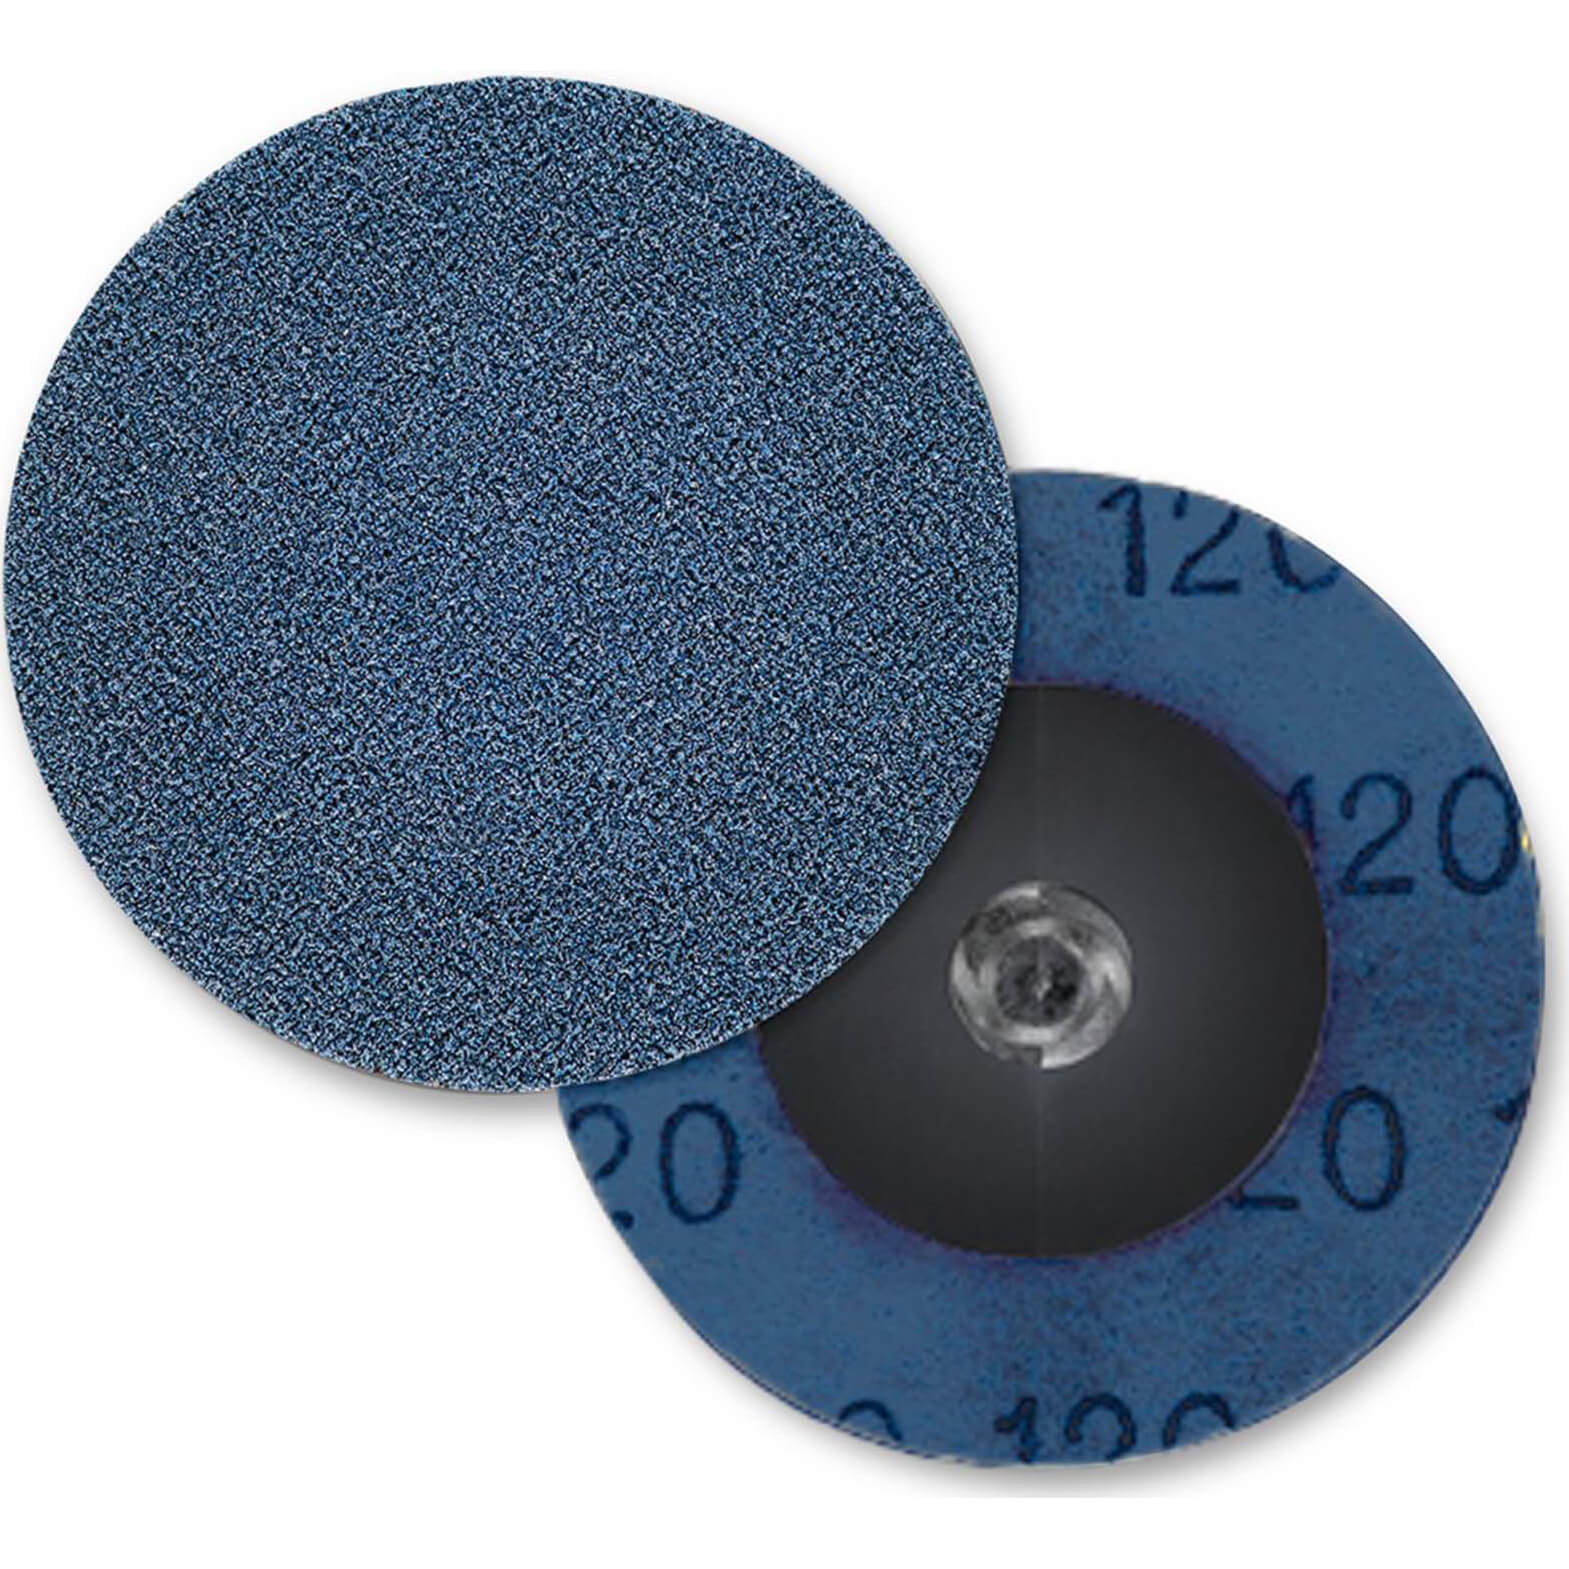 Image of Sia 2820 Siamet X Quick Change Abrasives Discs 50mm 80g Pack of 1